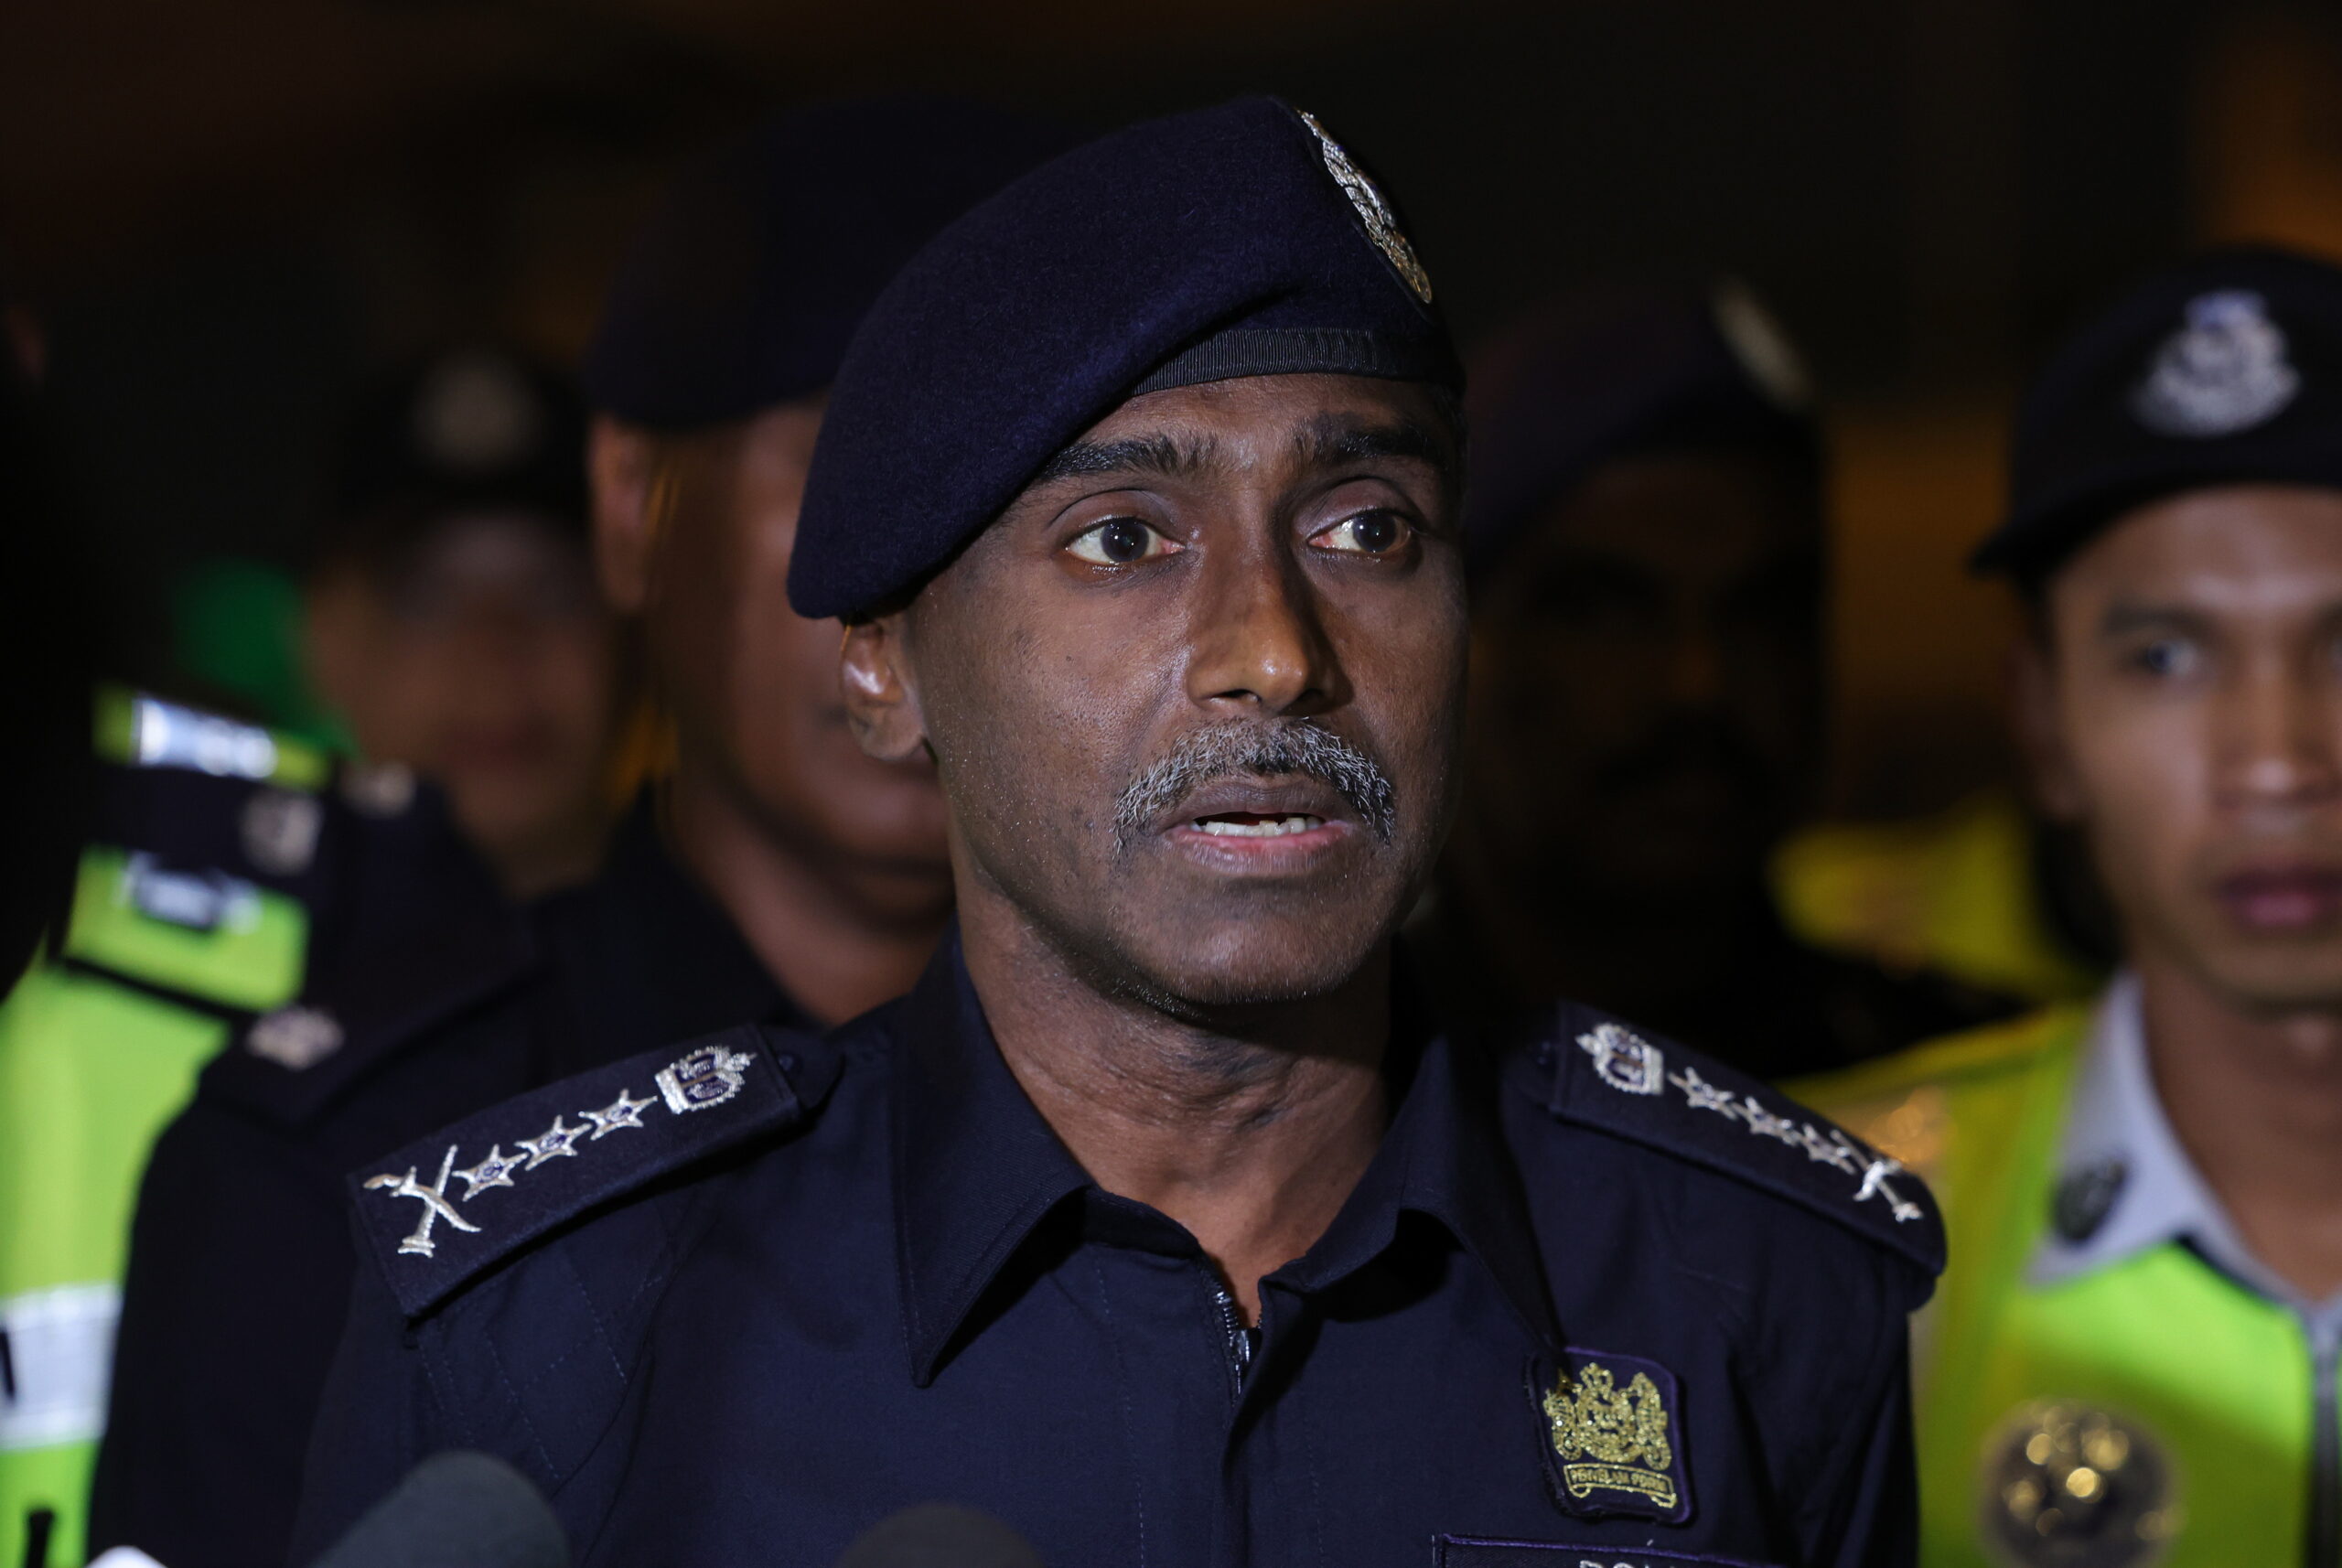 Johor police chief among many parties who received bomb threat via email